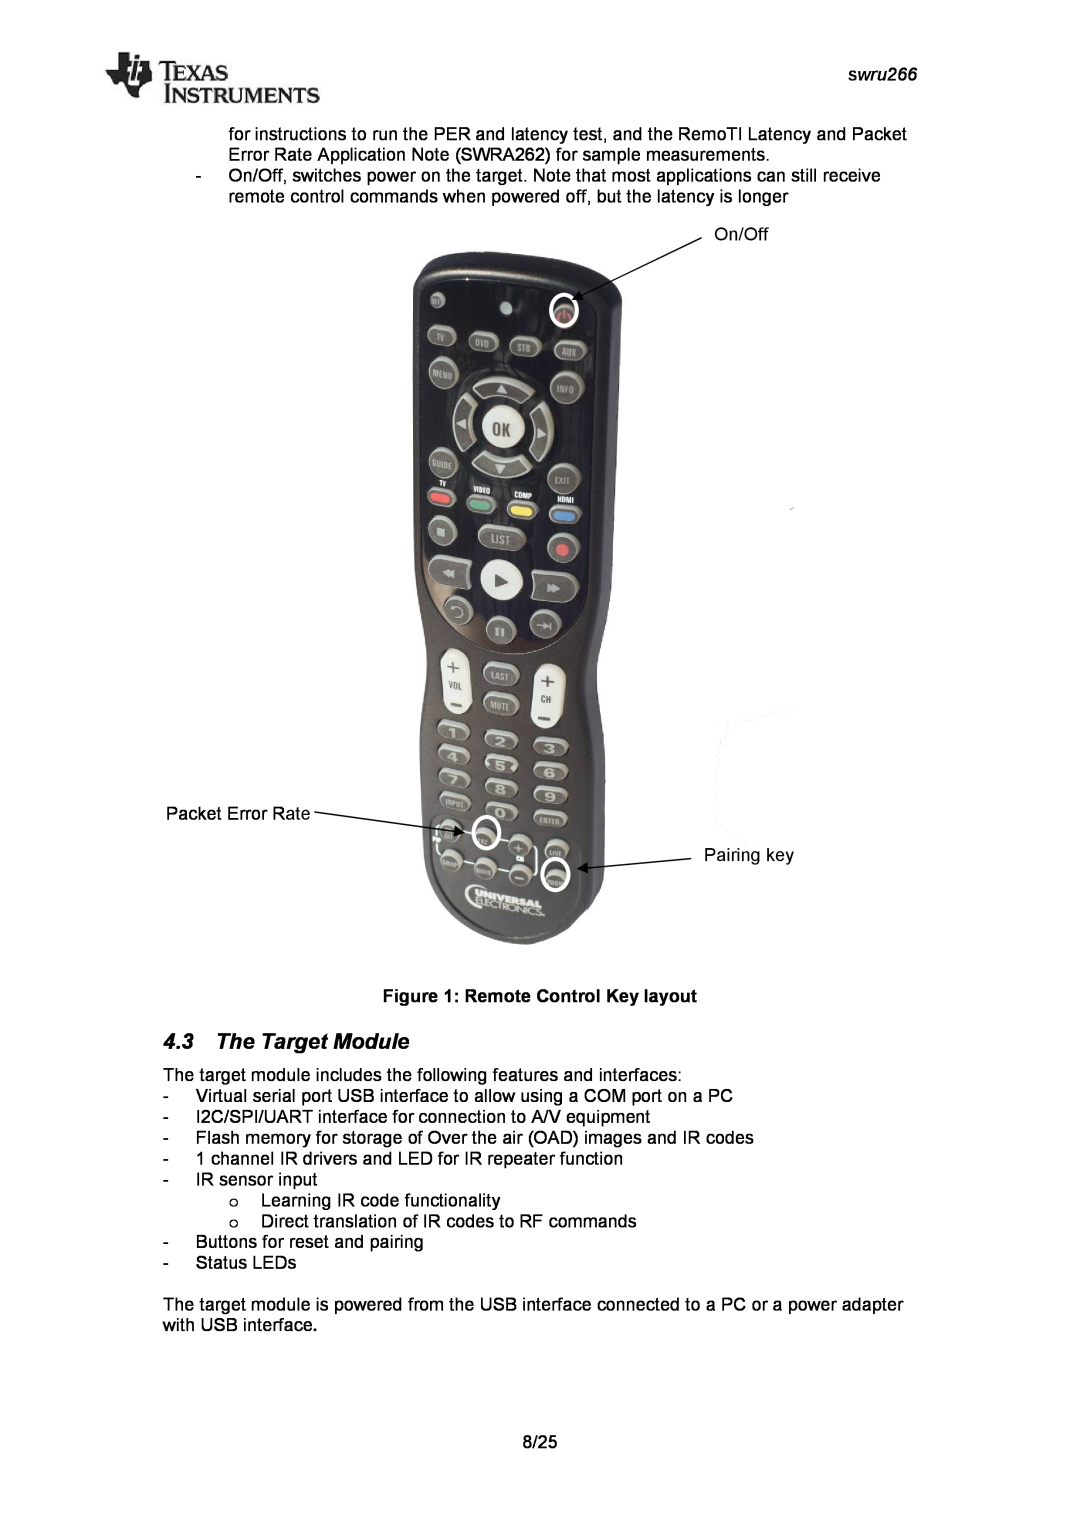 Texas Instruments CC2533 manual 4.3The Target Module, Remote Control Key layout, swru266 